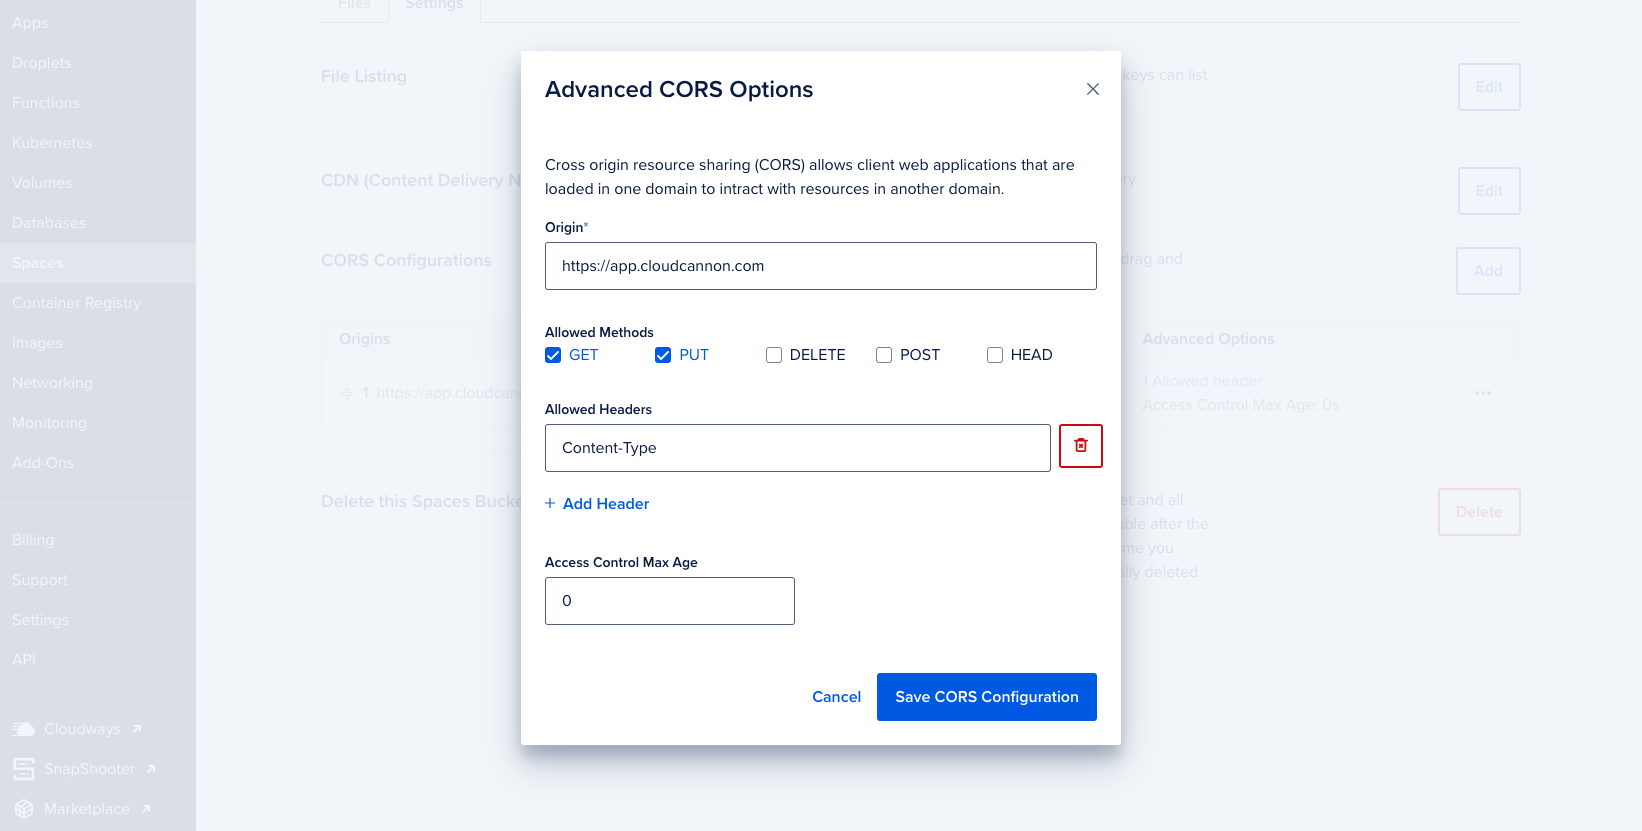 Screenshot of the CORS policy editor in DigitalOcean